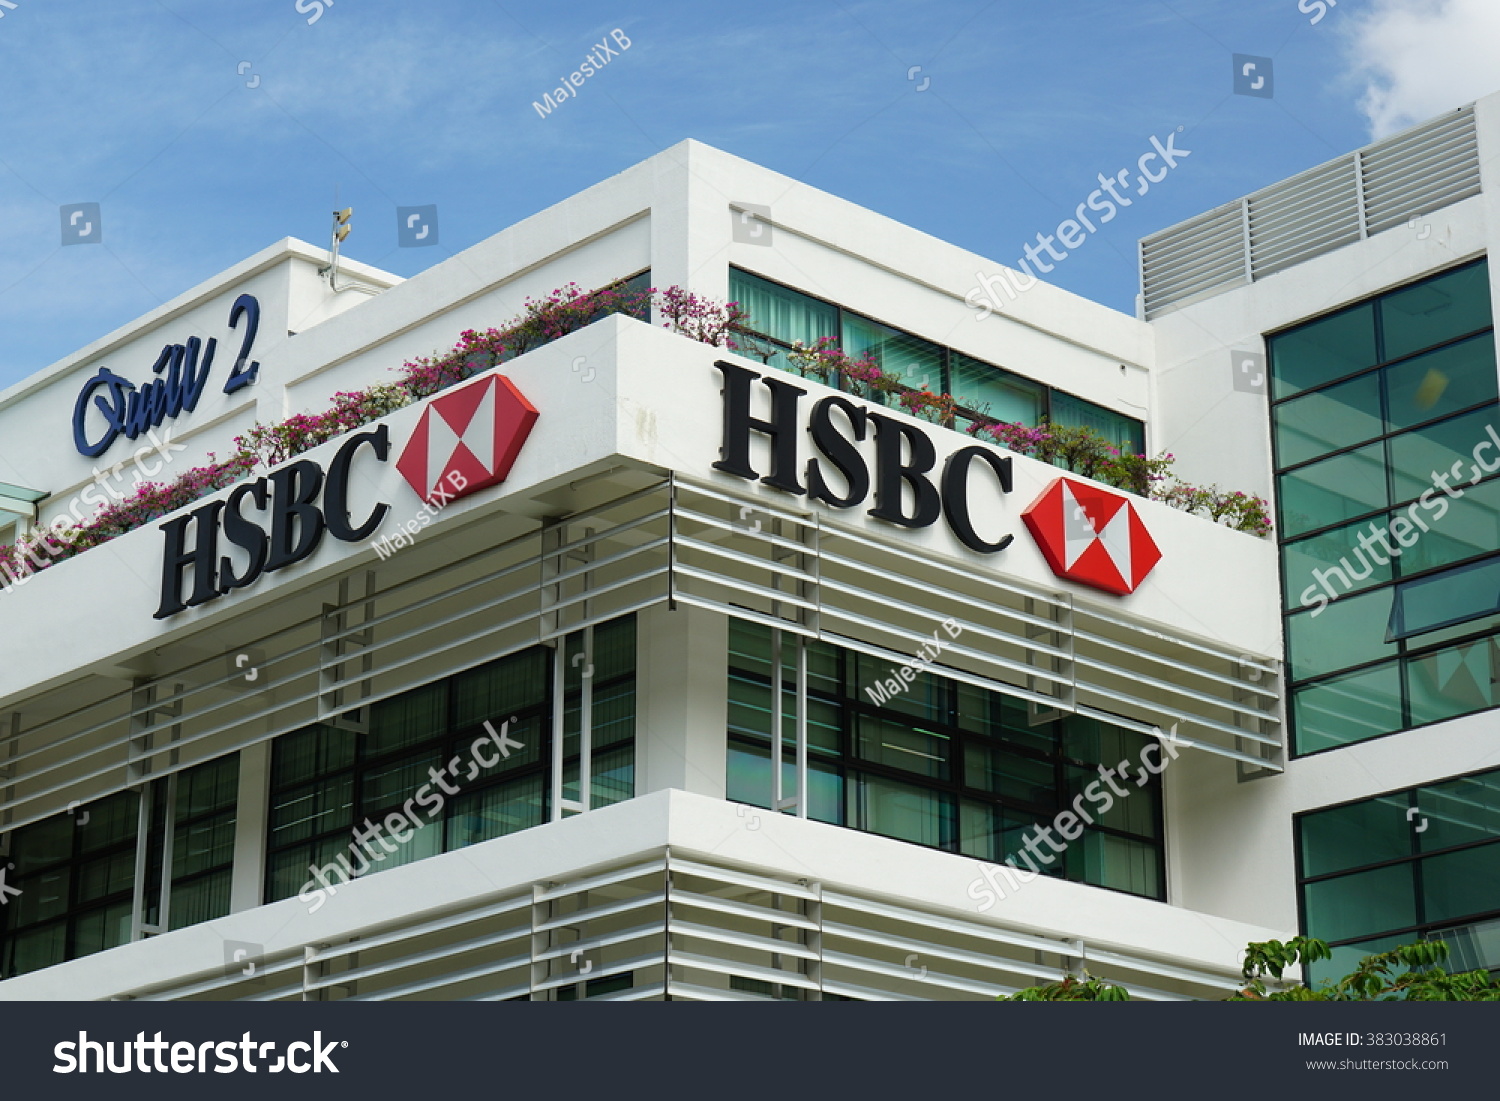 Hsbc Global Service Centre Malaysia Offers Employees Work Life Balance